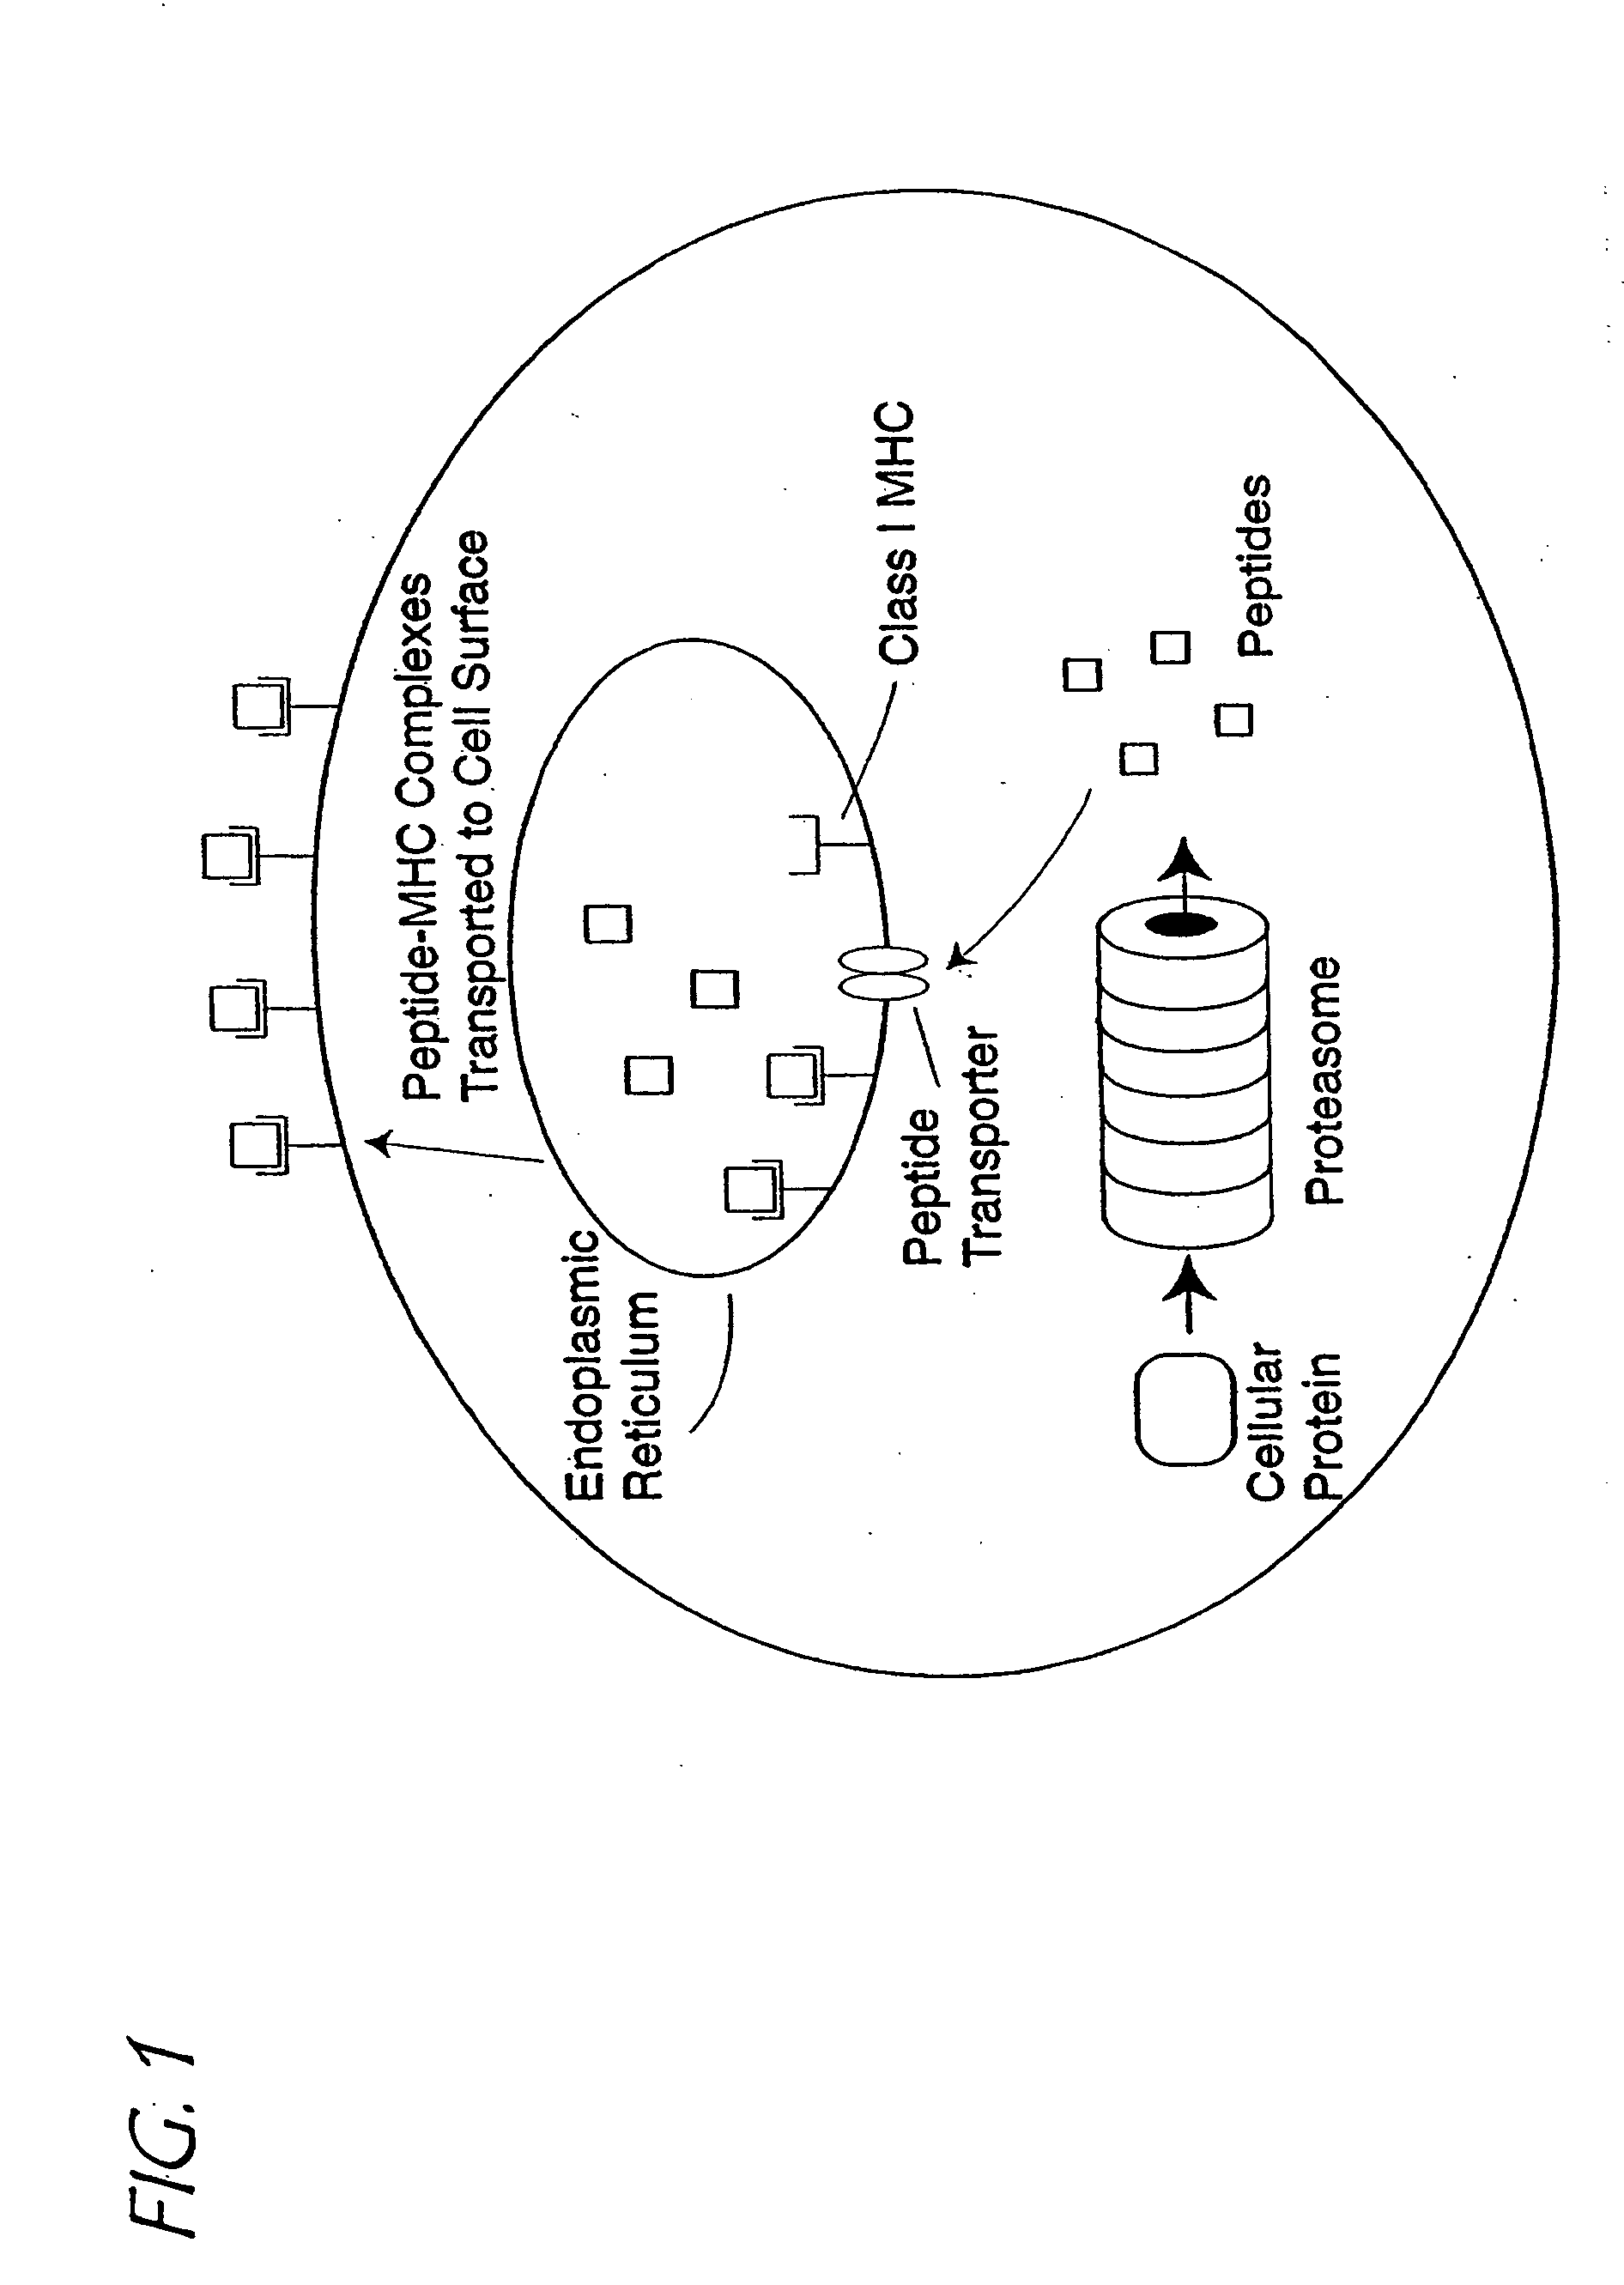 Method of epitope discovery